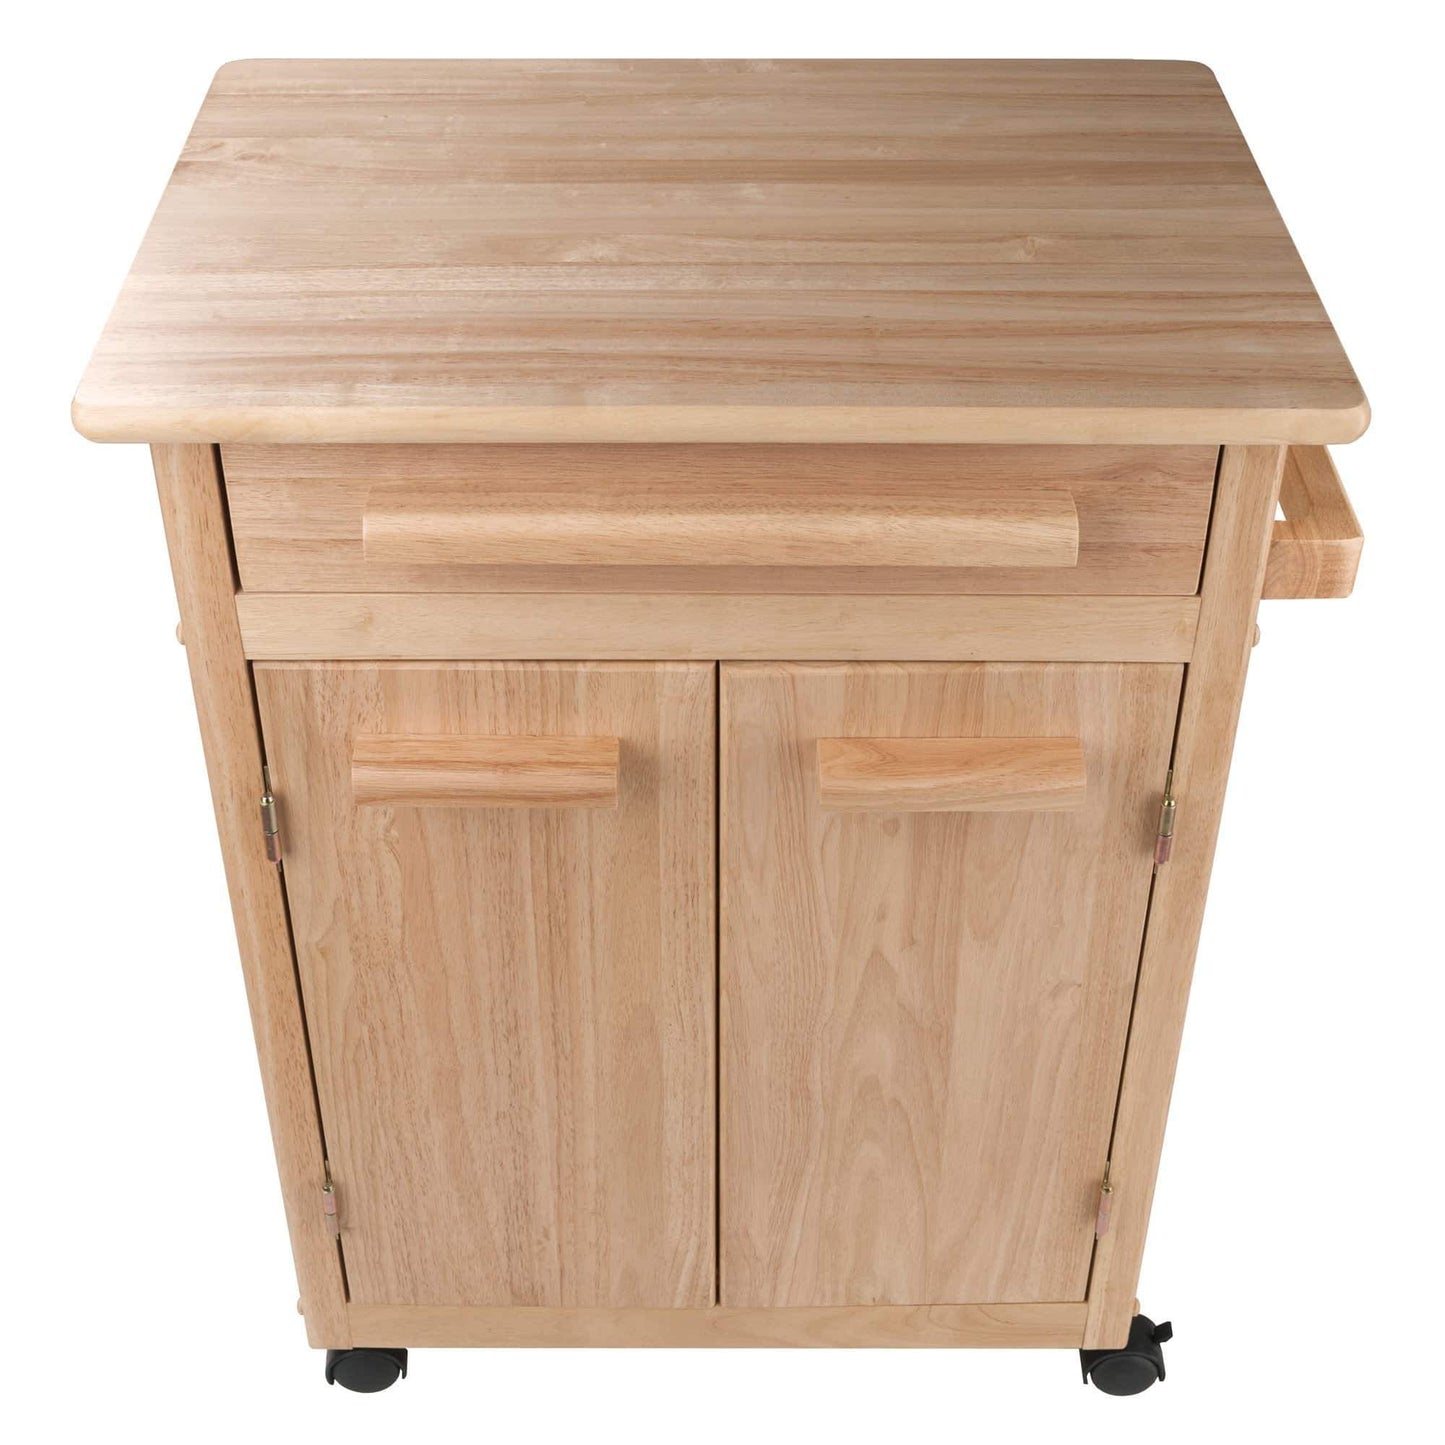 Discover winsome wood single drawer kitchen cabinet storage cart natural